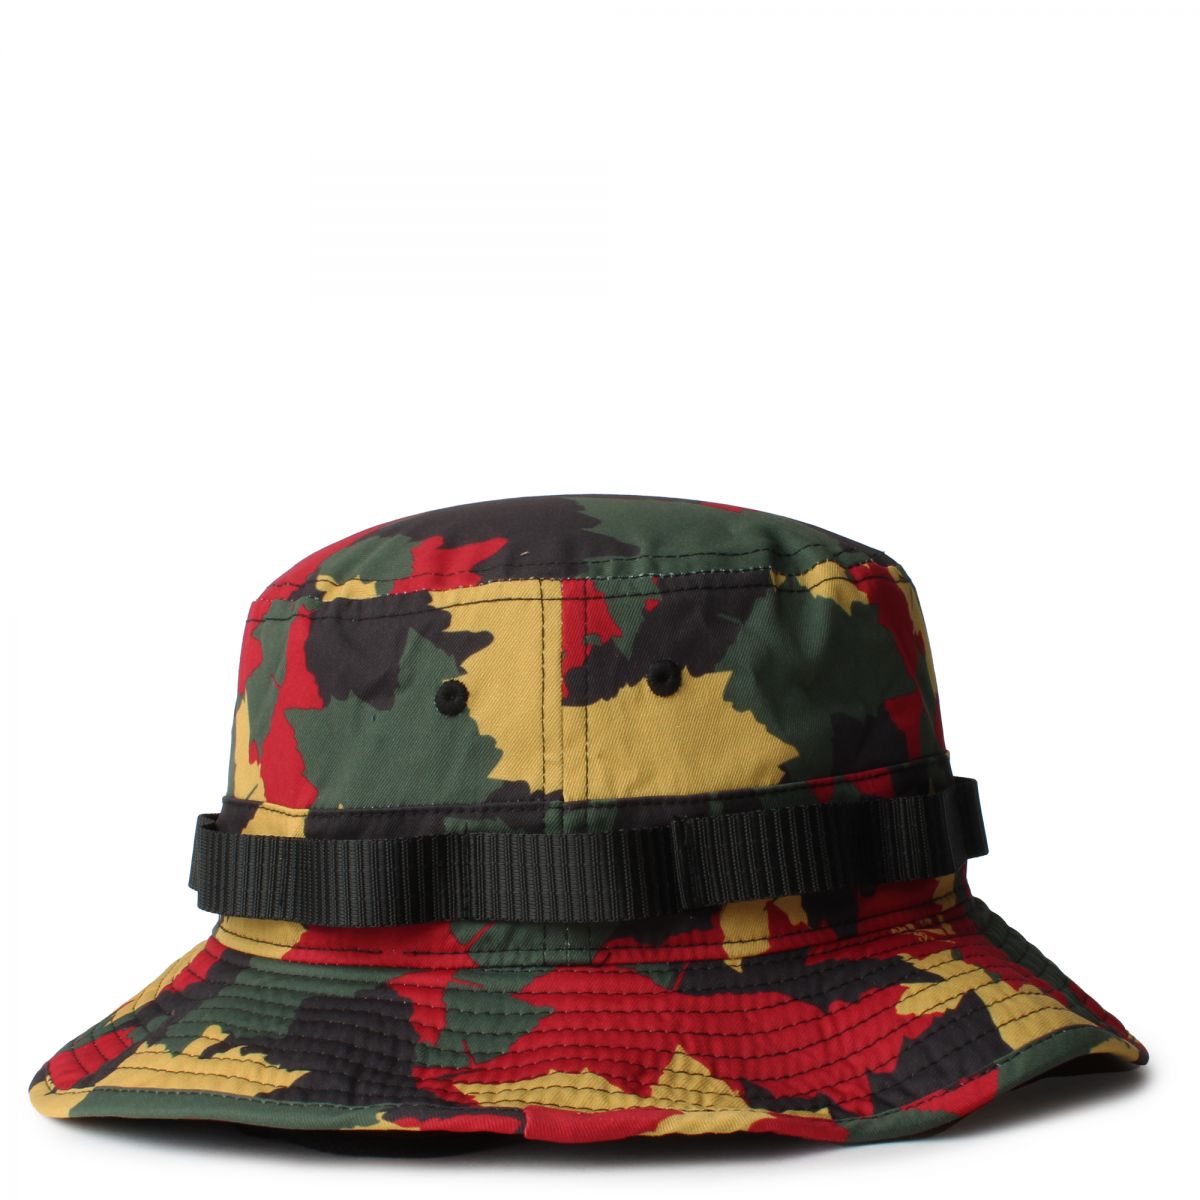 Multi colored Camouflage Bucket Hats for Women